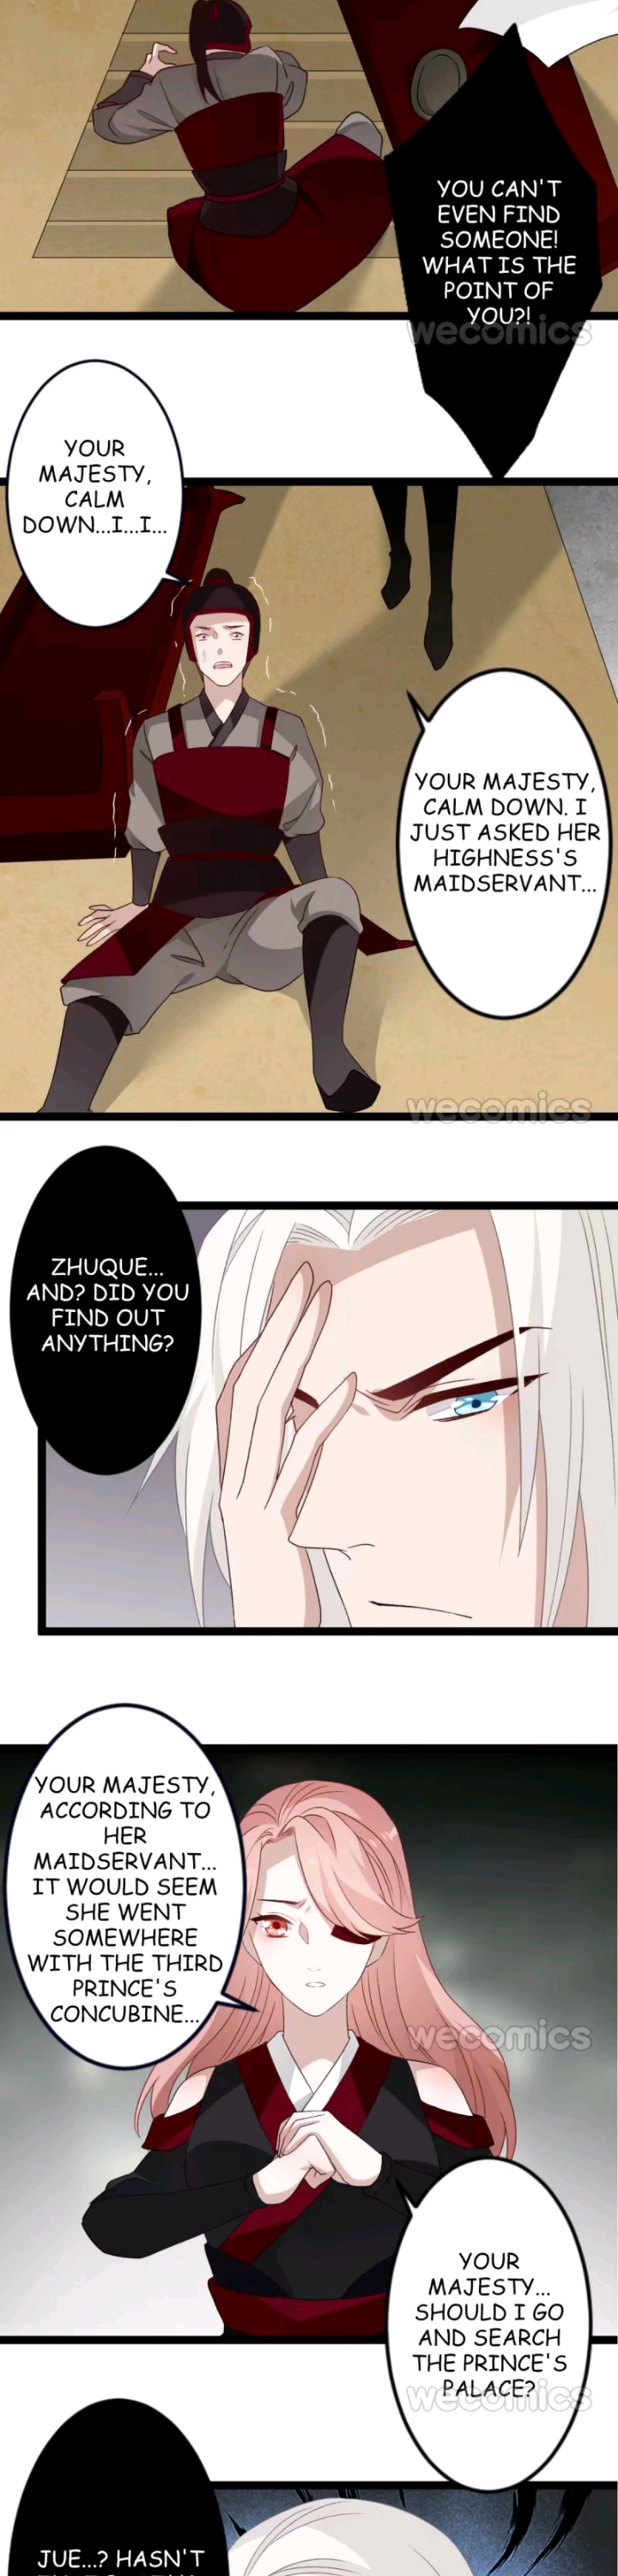 Curse of Loulan: The Tyrant Bestows Favor on Me Chapter 85 page 6